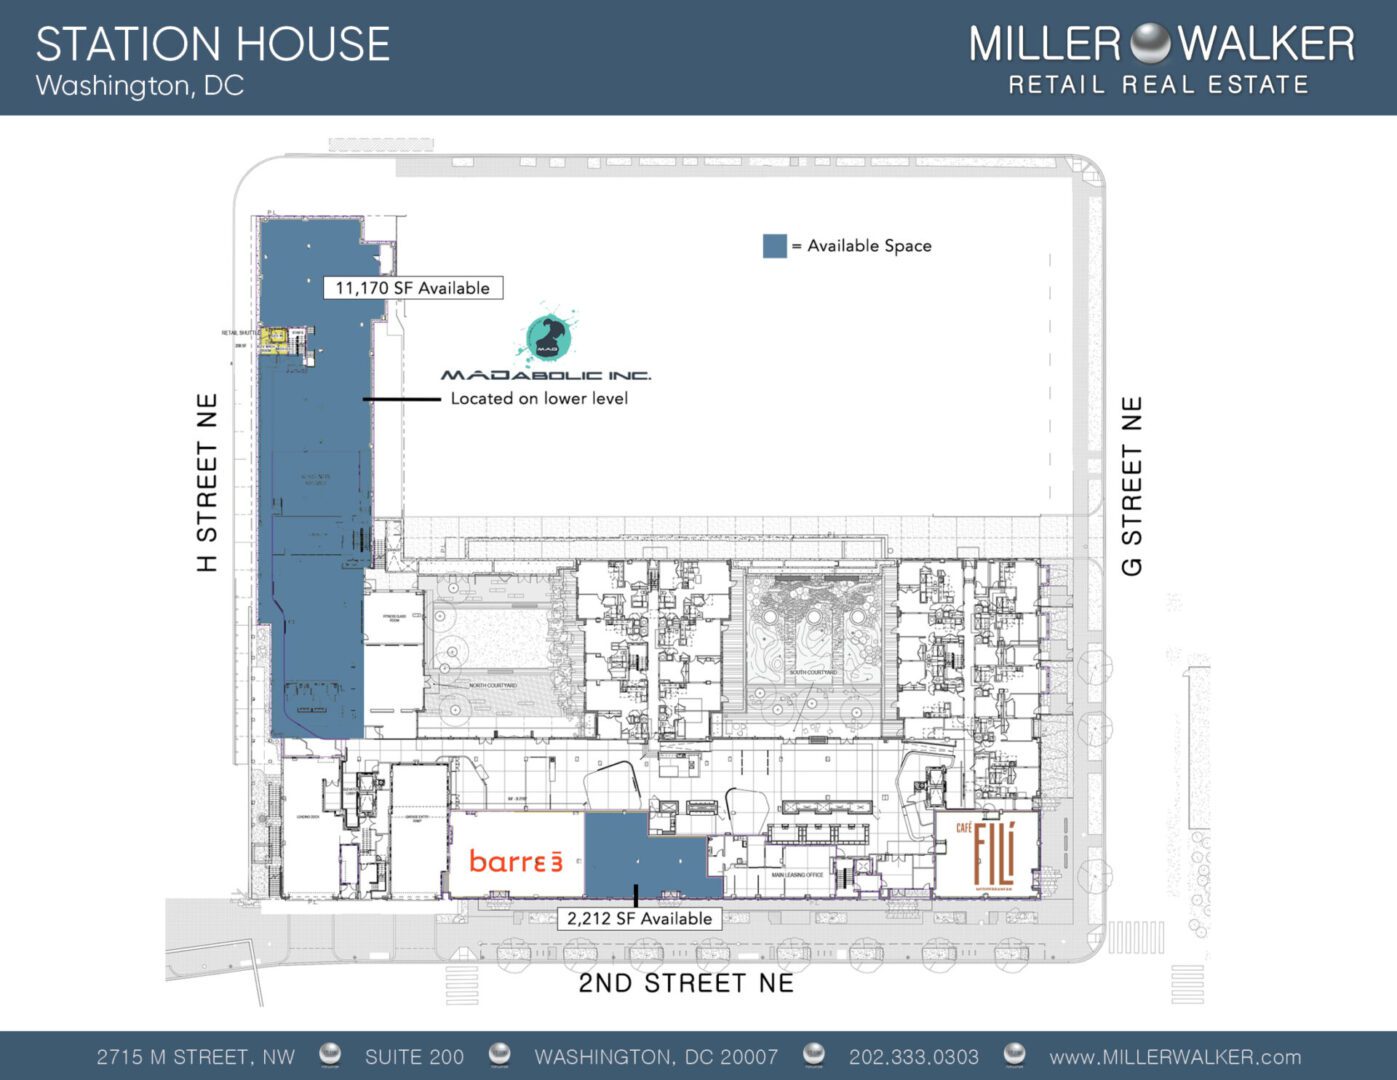 Floor Plans Retail Space for Lease DC - Station House 701 2nd street, NE restaurant space for lease - H Street corridor Retail brokers dc